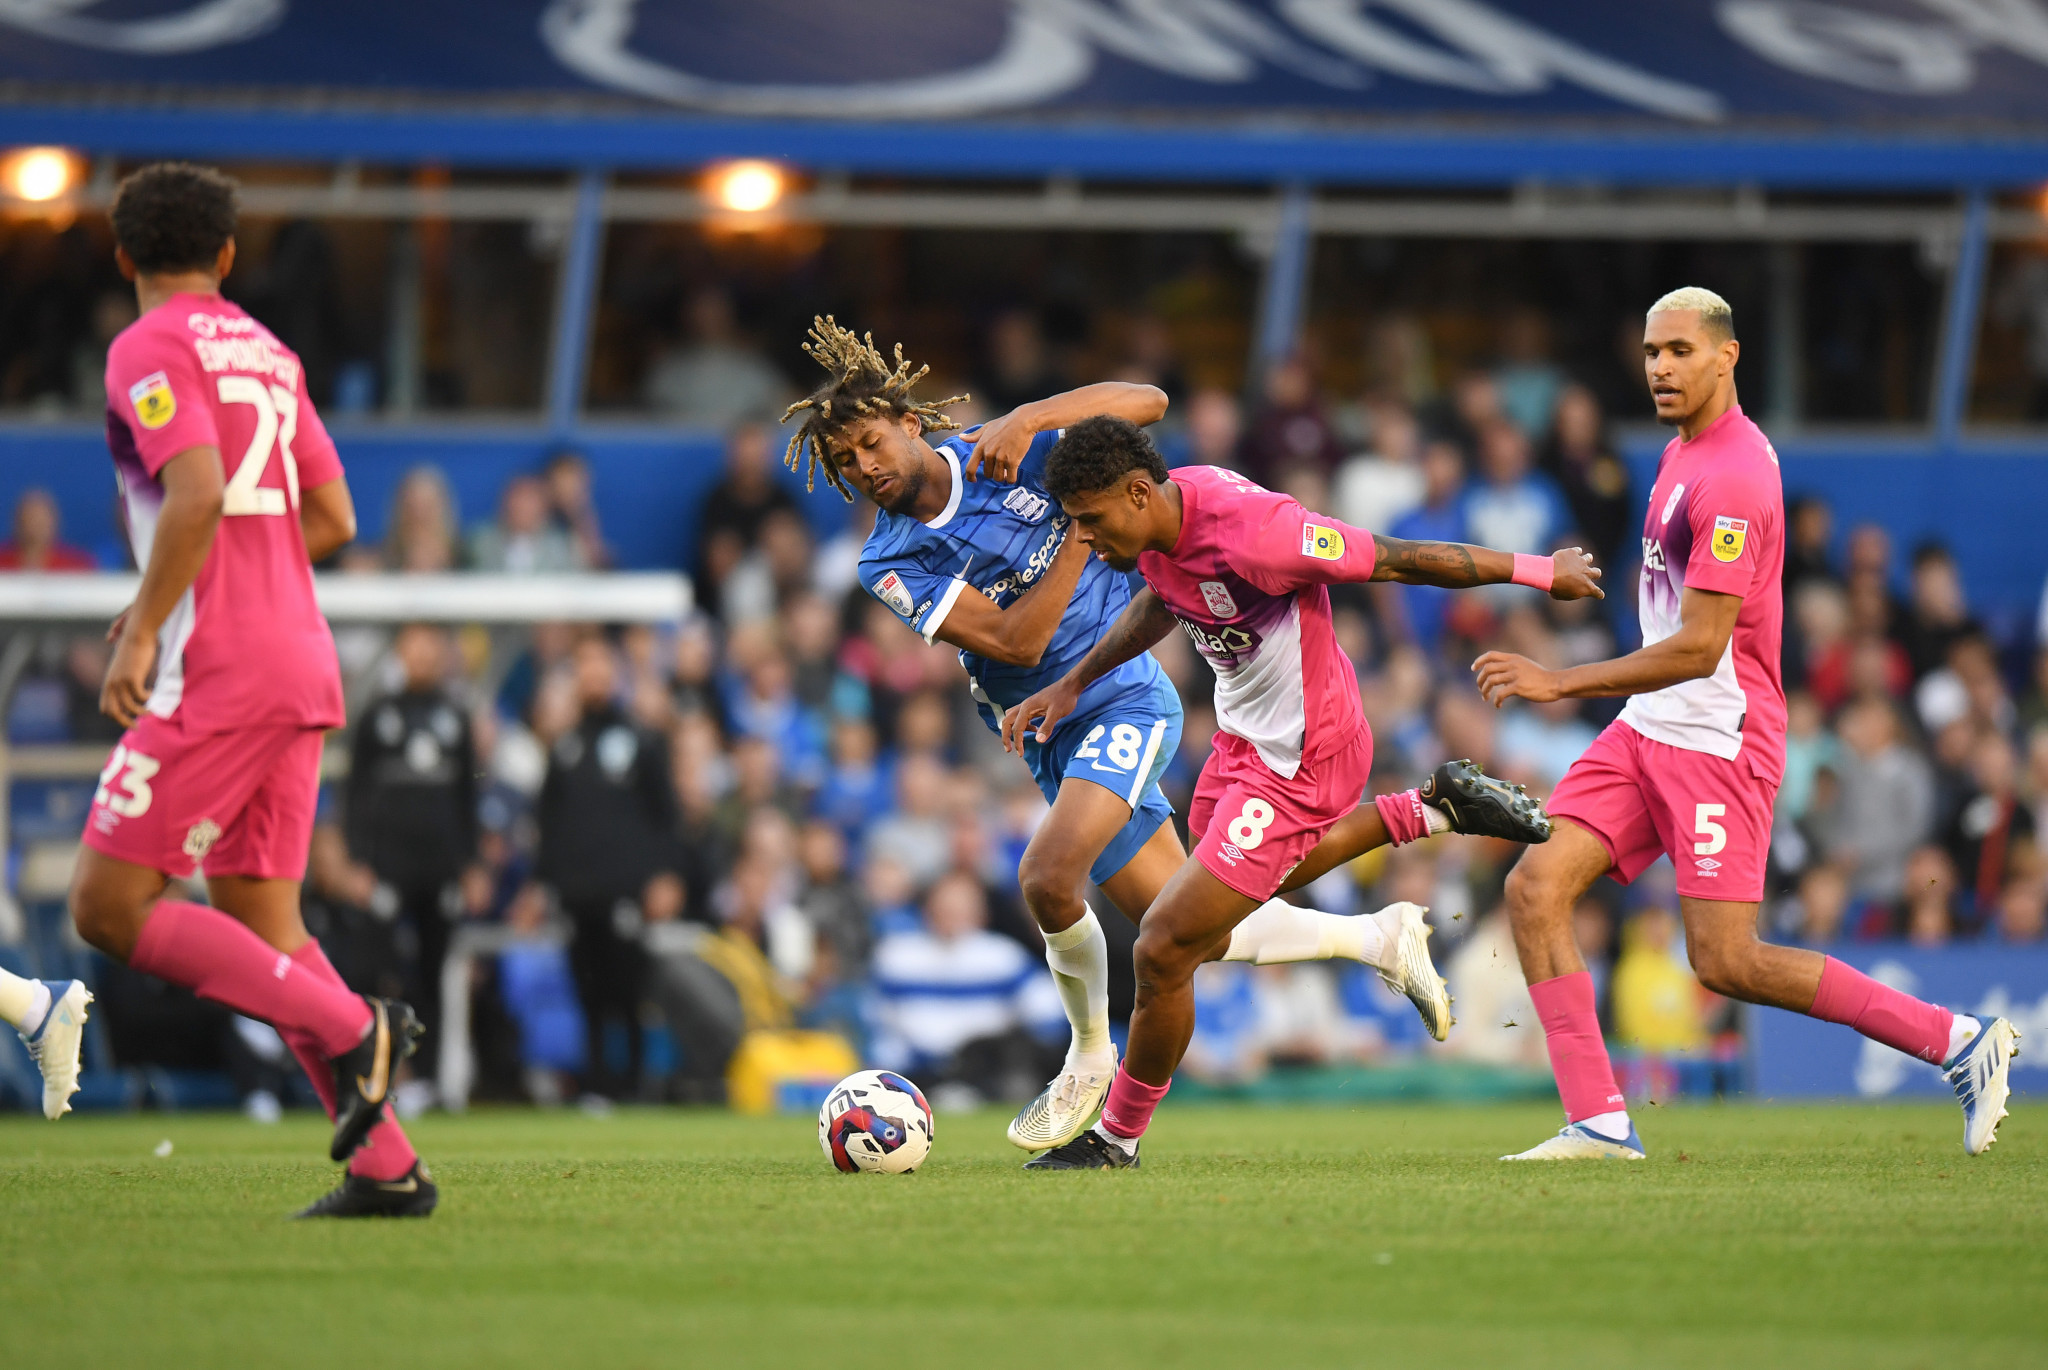 Birmingham City's home match was brought forward to Friday (August 5) due to the club being 